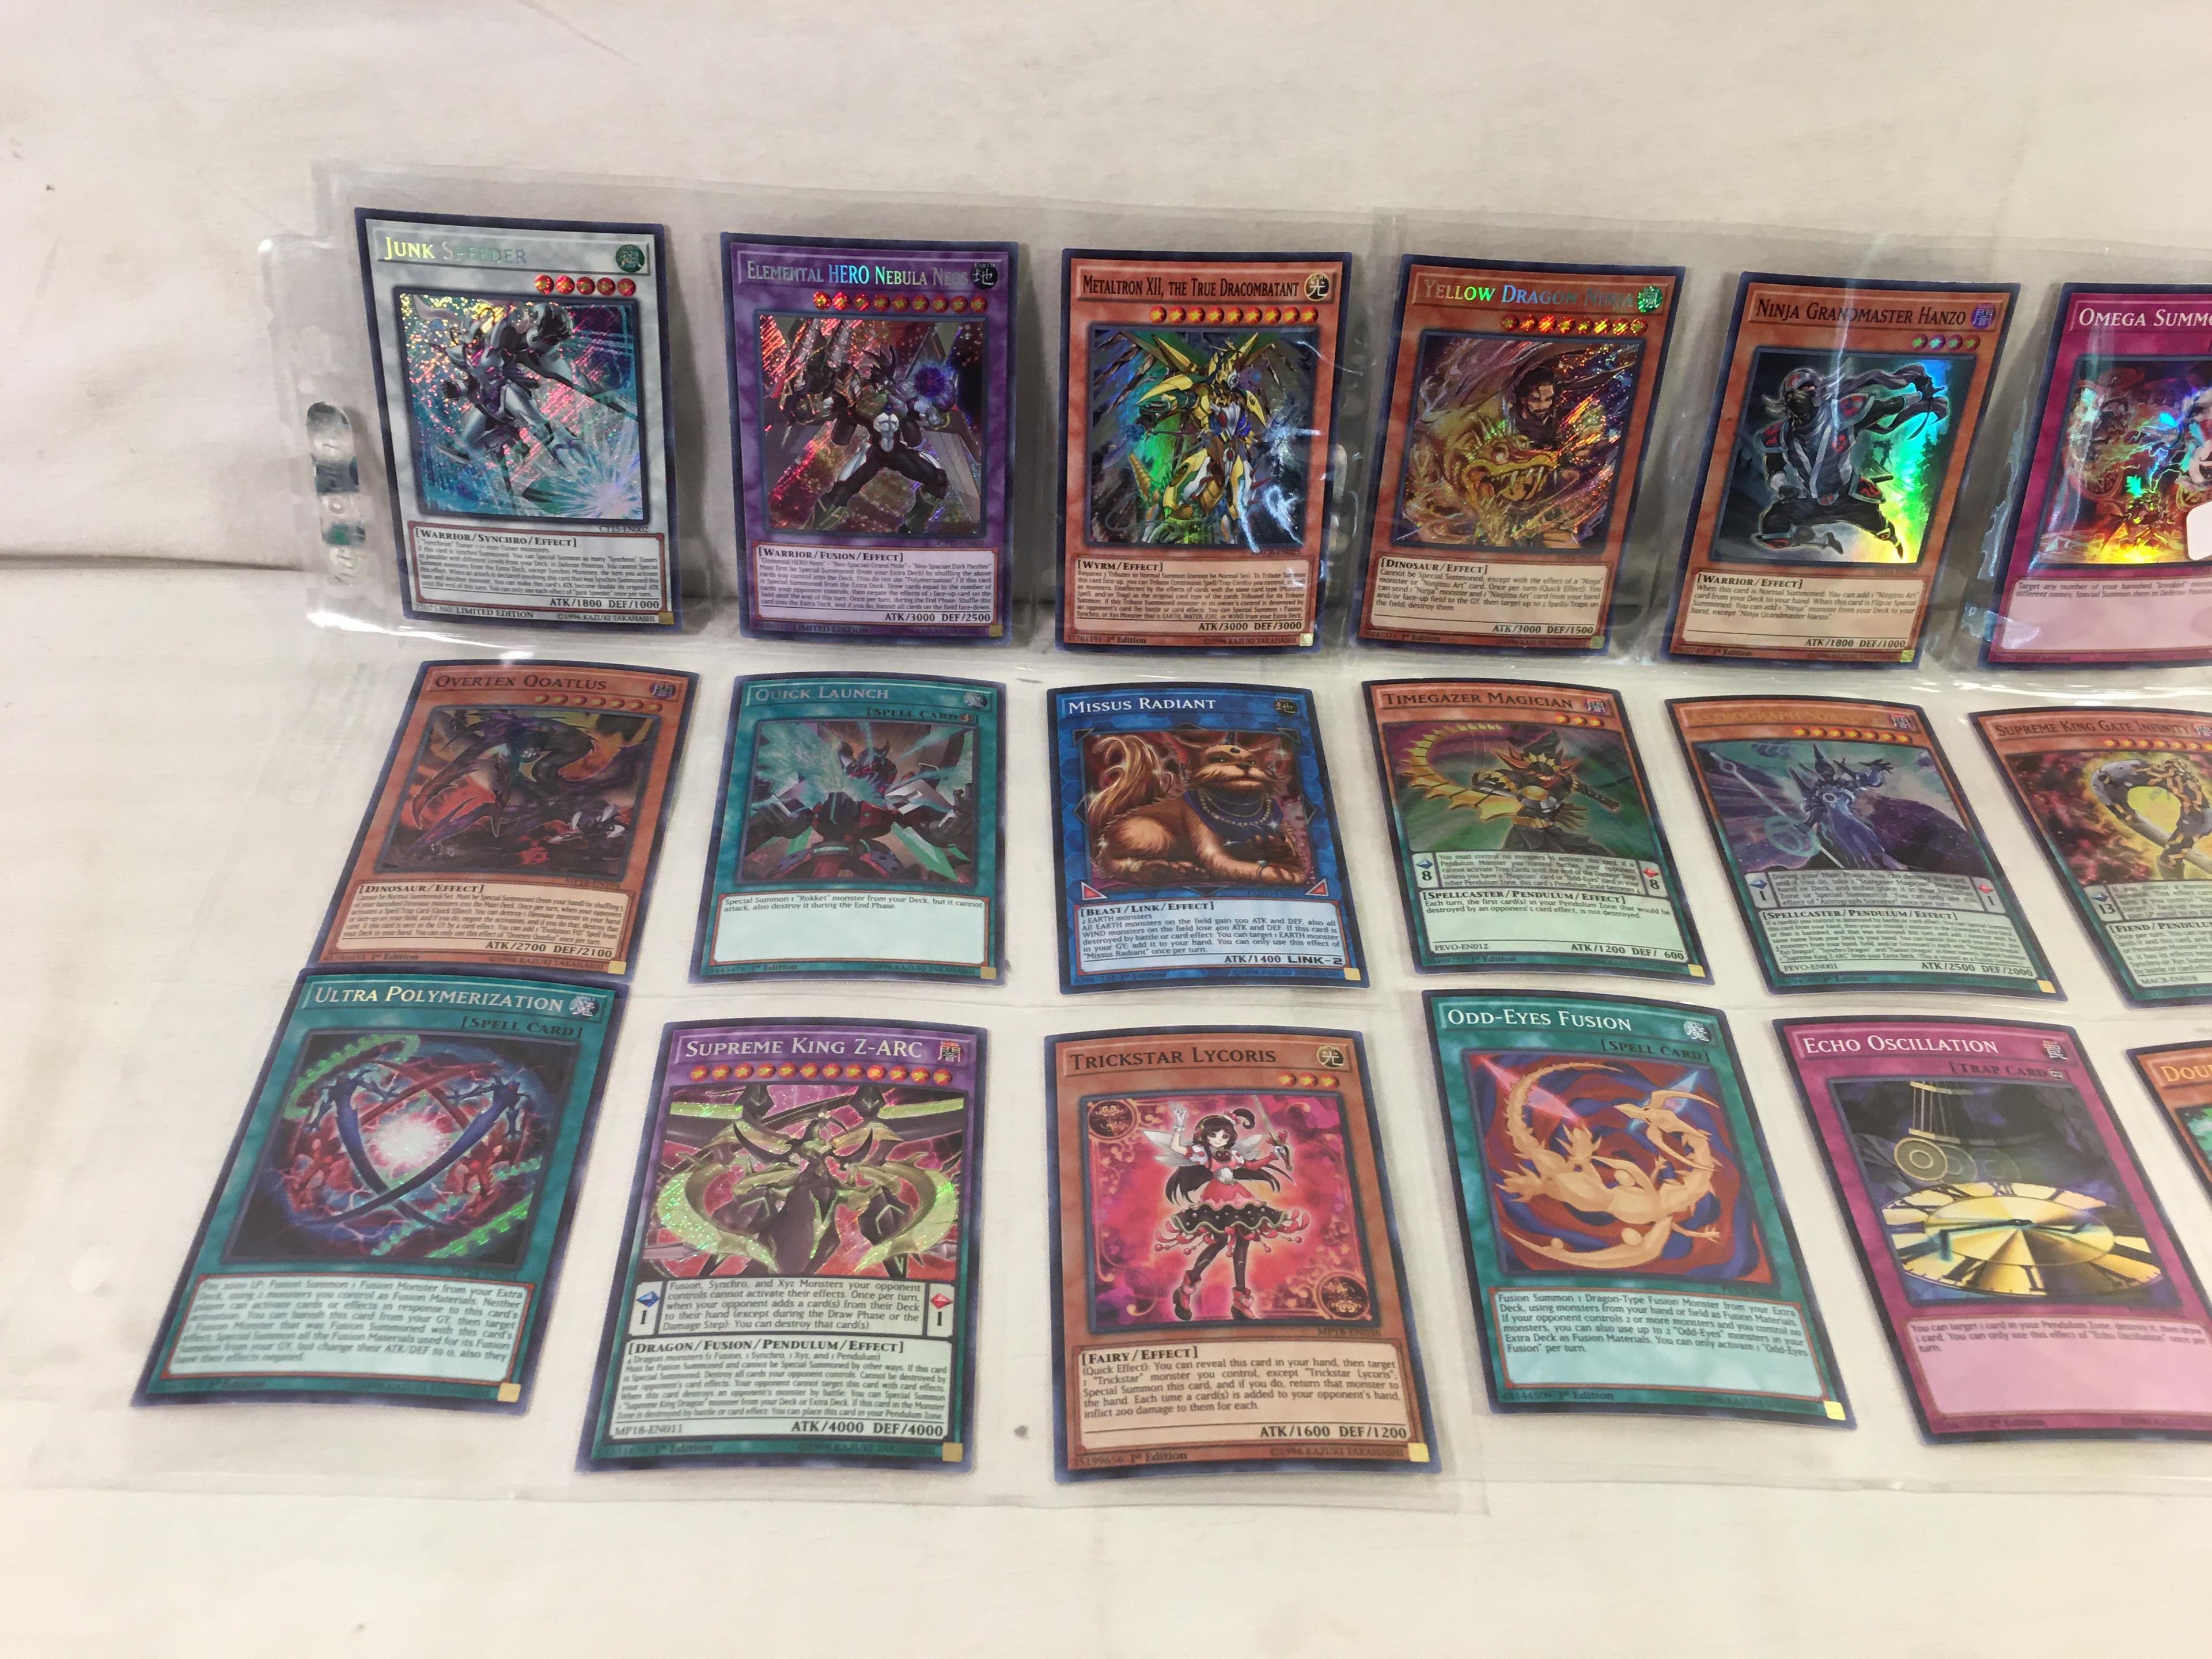 Lot of 18 Pcs Collector Loose Konami Yu-Gi-Oh Trading Card Game - See Pictures